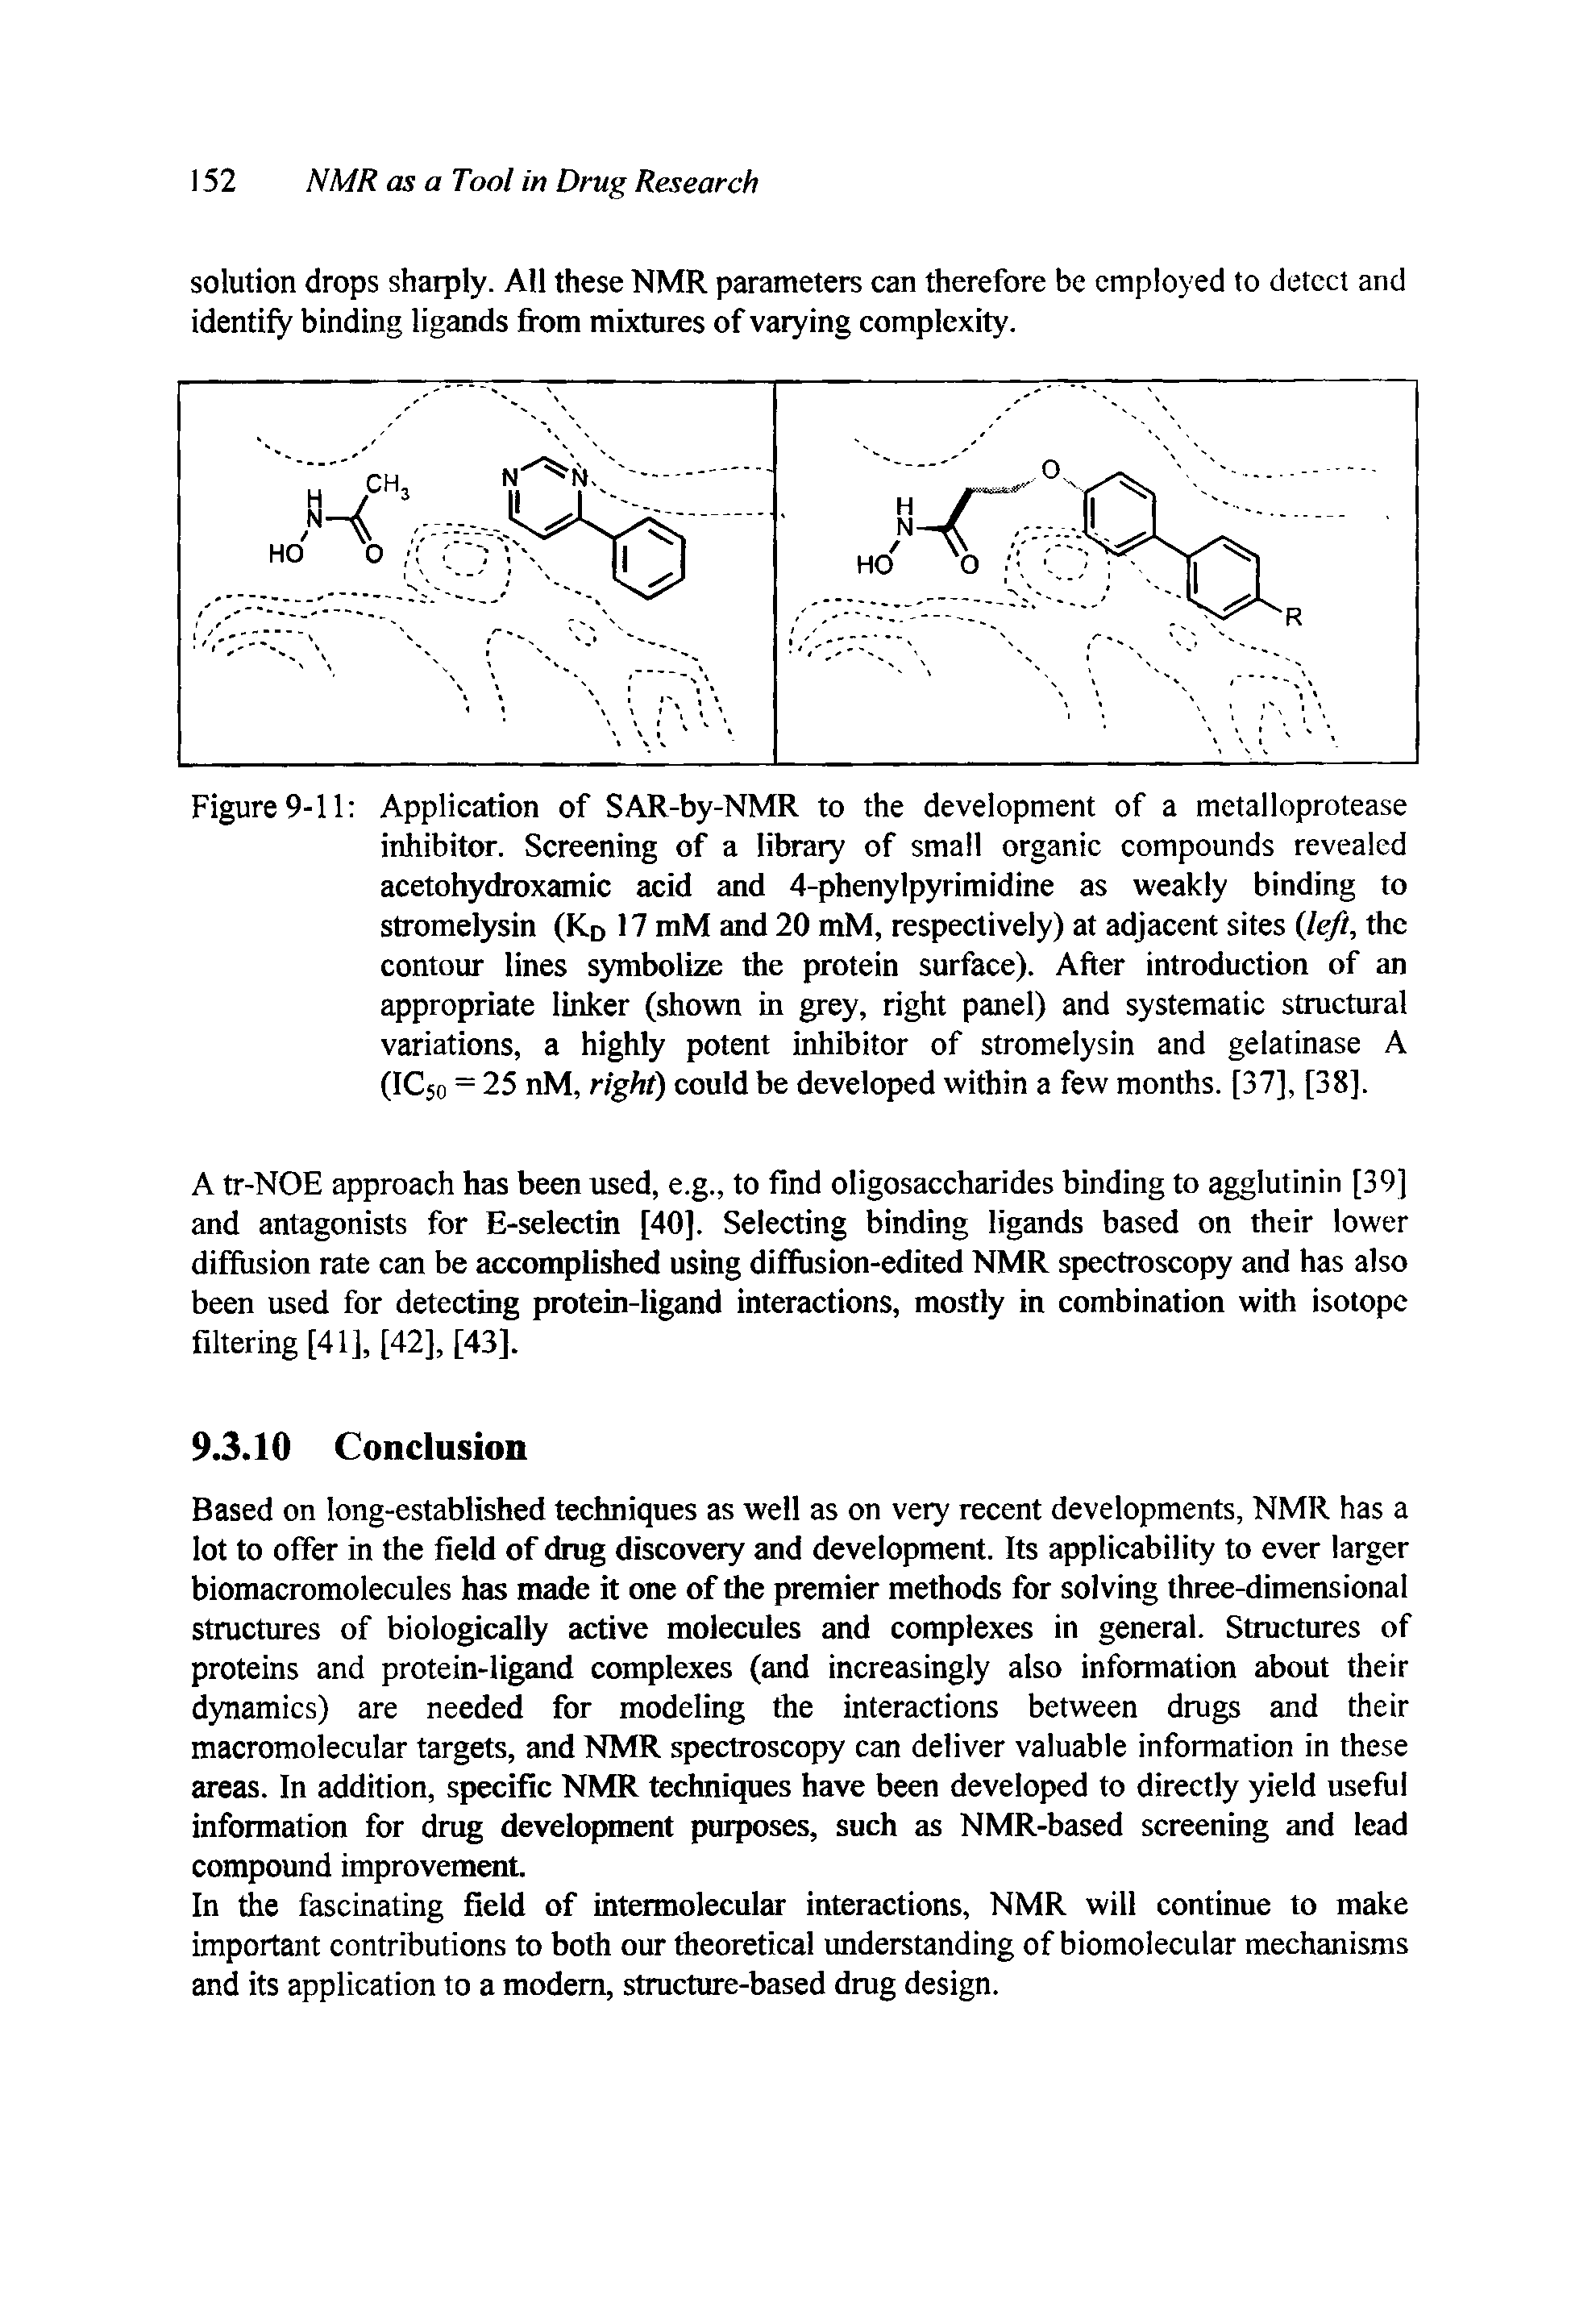 Figure 9-11 Application of SAR-by-NMR to the development of a metalloprotease inhibitor. Screening of a library of small organic compounds revealed acetohydroxamic acid and 4-phenylpyrimidine as weakly binding to stromelysin (Kd 17 mM and 20 mM, respectively) at adjacent sites left, the contour lines symbolize the protein surface). After introduction of an appropriate linker (shown in grey, right panel) and systematic structural variations, a highly potent inhibitor of stromelysin and gelatinase A (IC50 = 25 nM, right) could be developed within a few months. [37], [38].